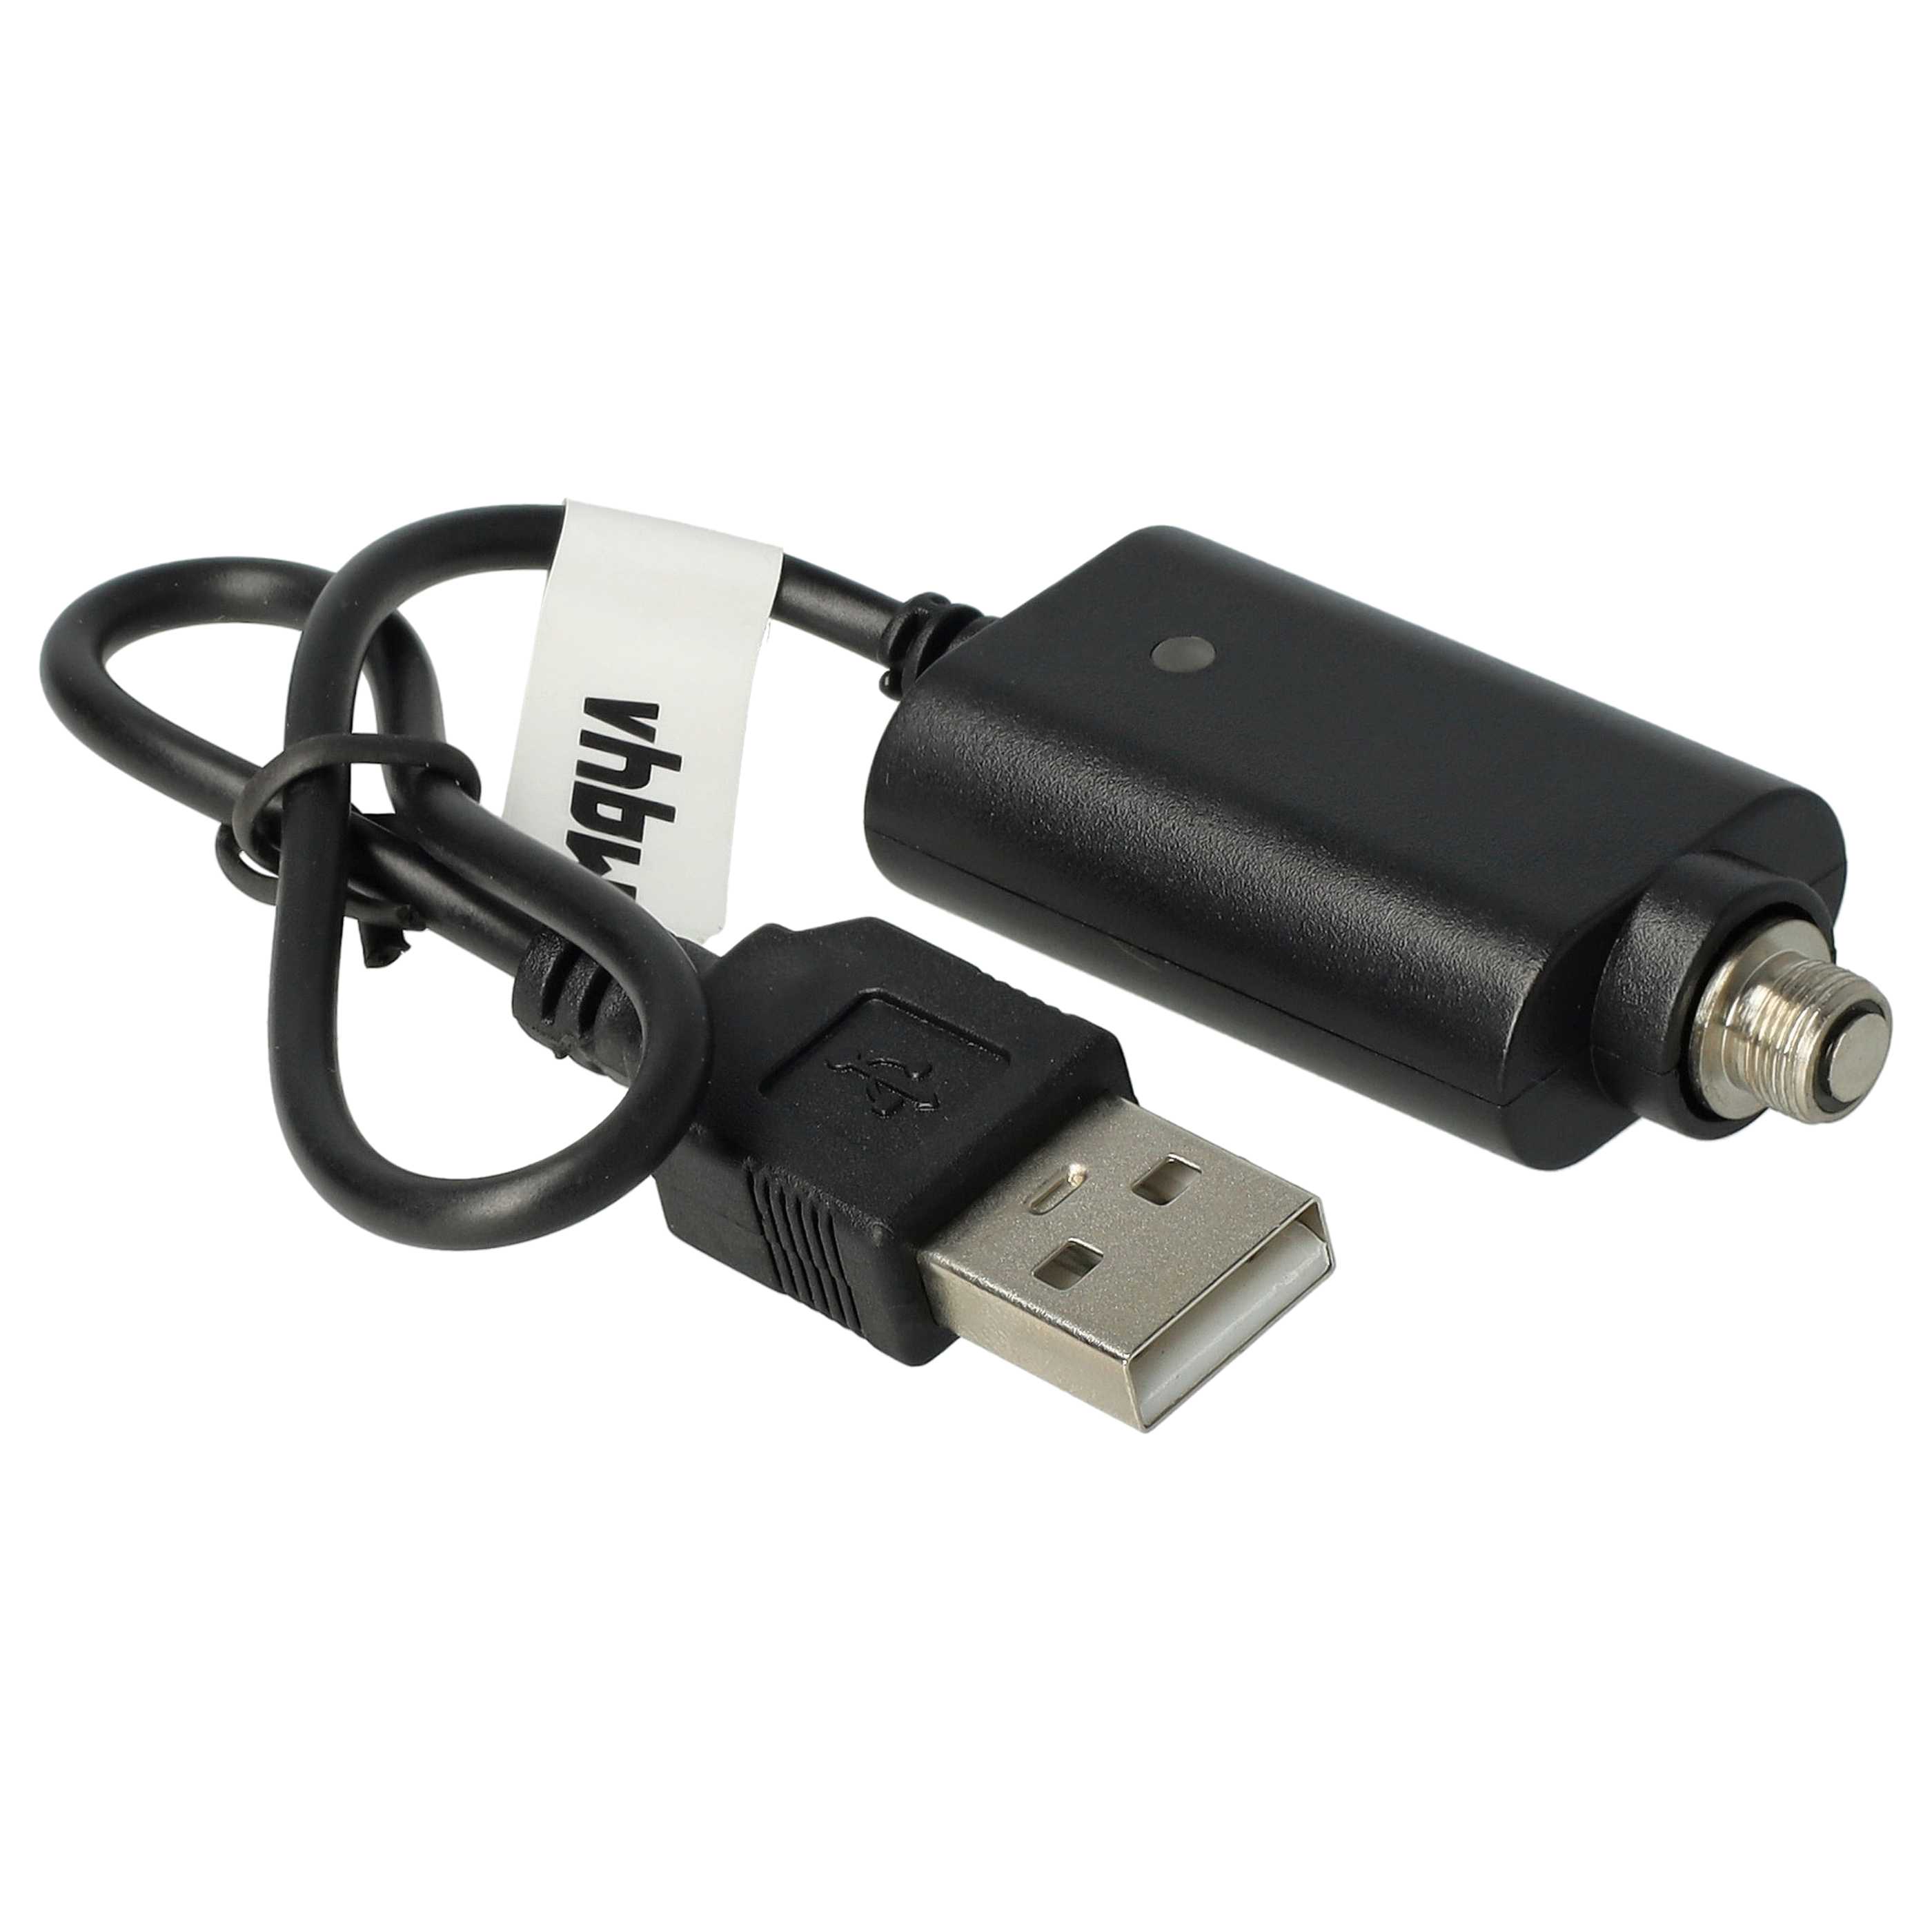 vhbw USB Charger compatible with various E-Cigarettes, E-Shisha Devices wtih Screw Thread - 25cm Cable